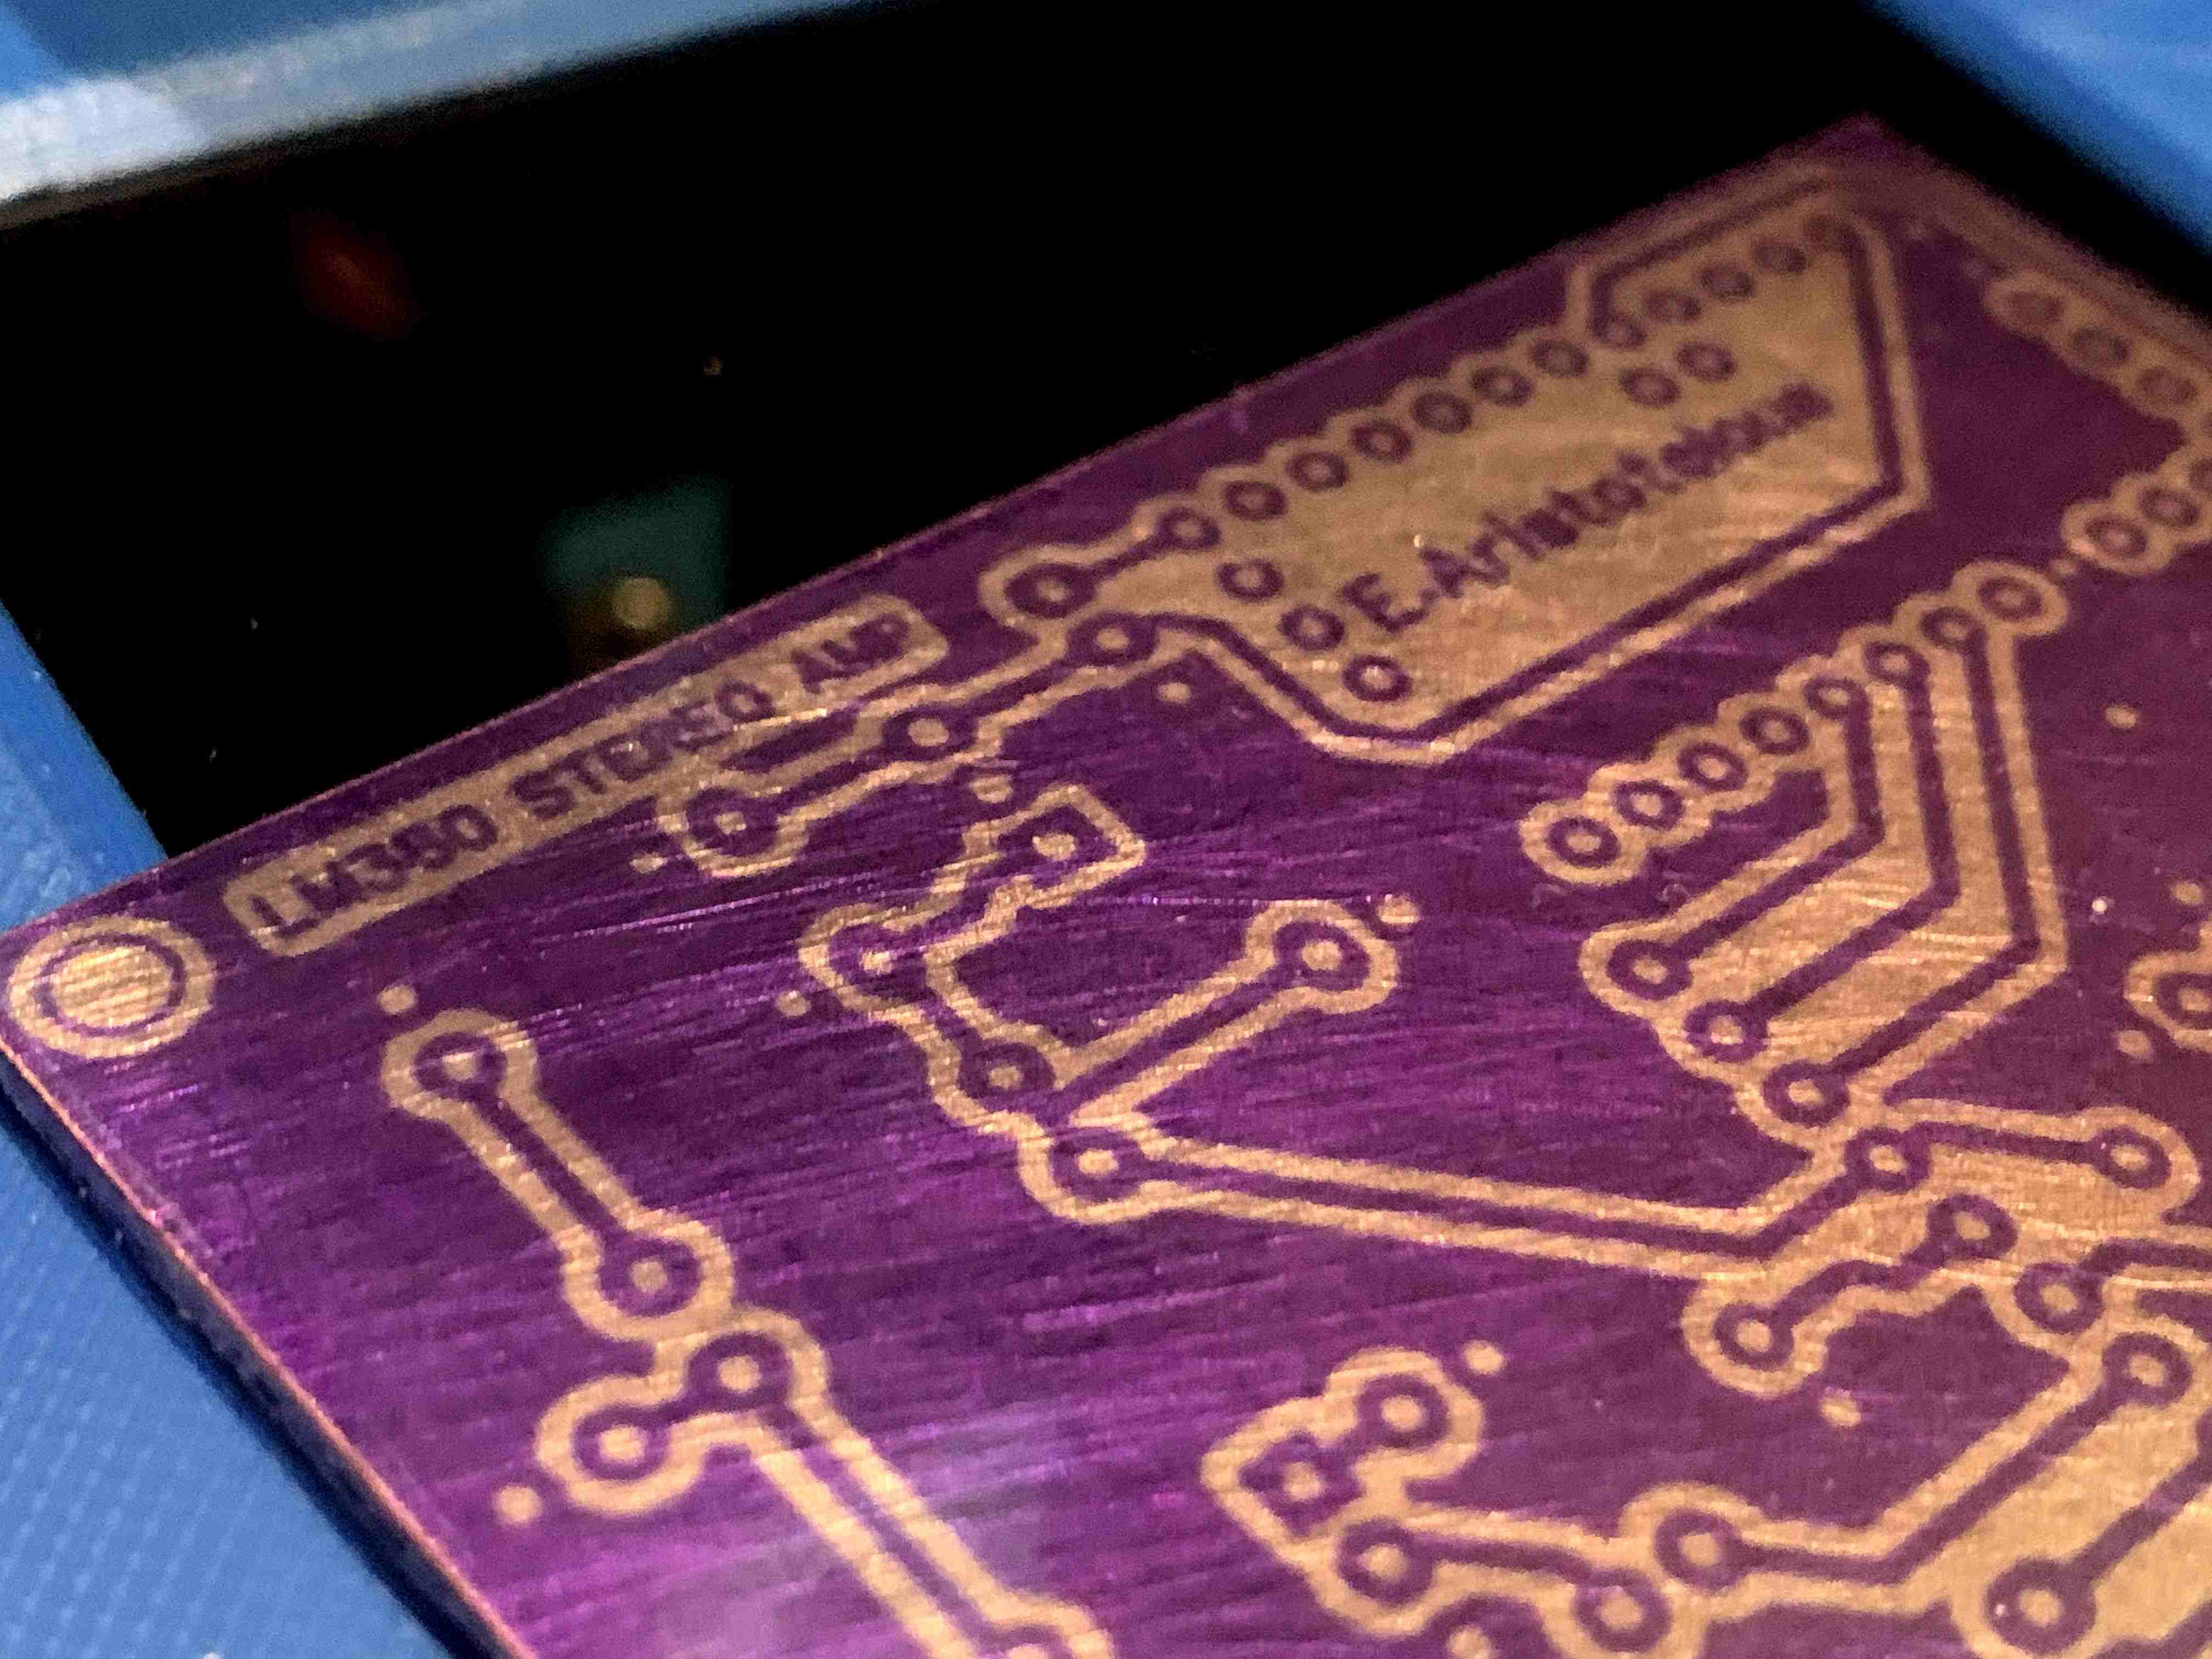 Anycubic Photon PCB exposing Jig